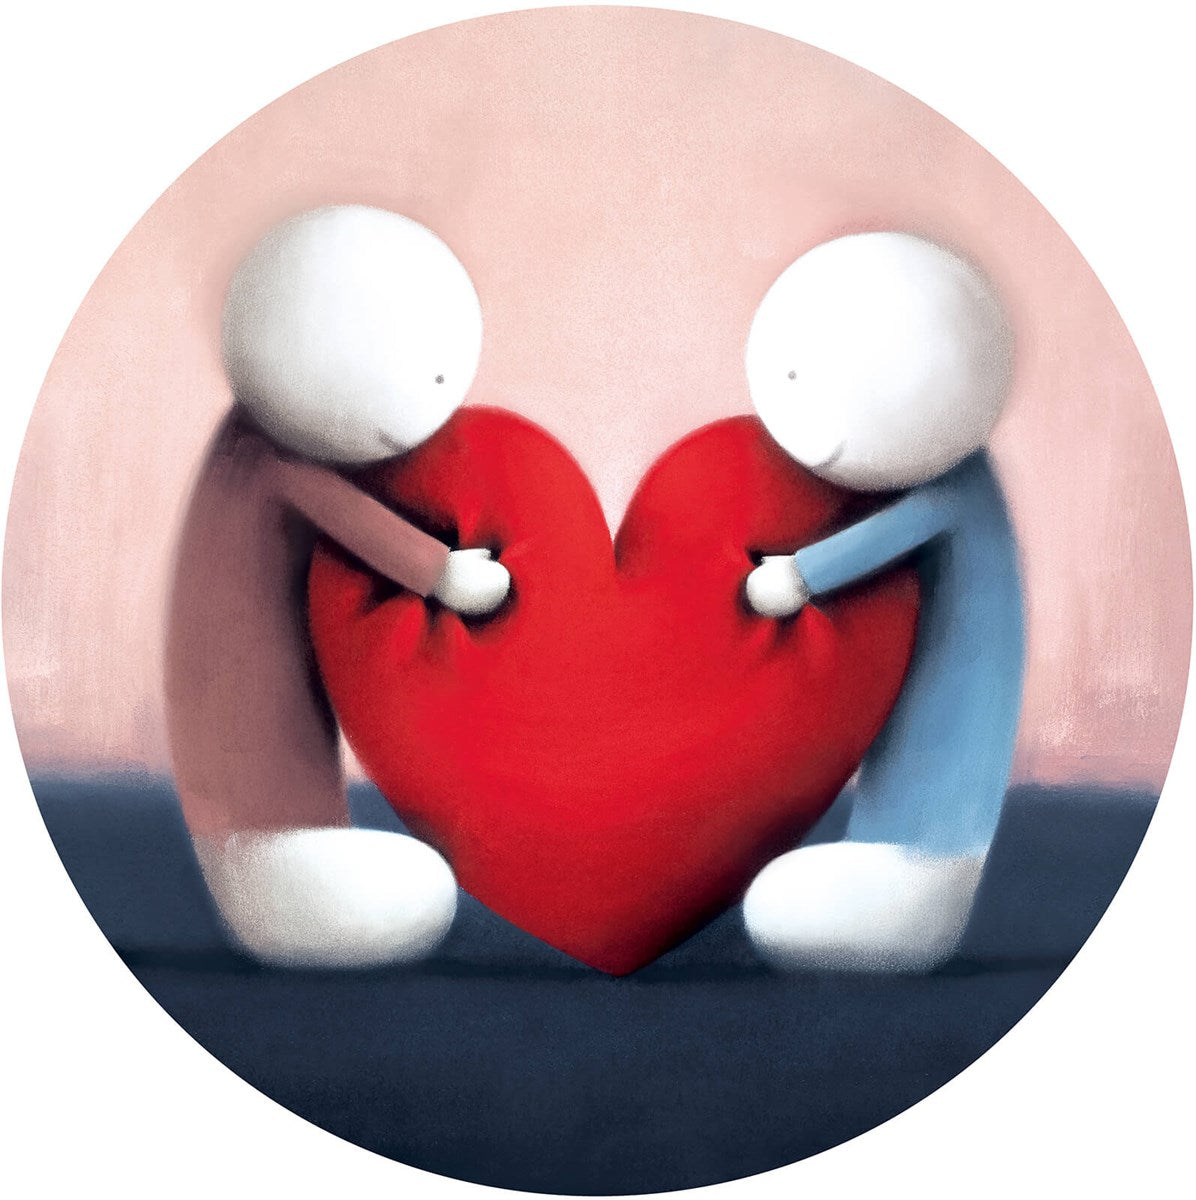 Share The Love by Doug Hyde